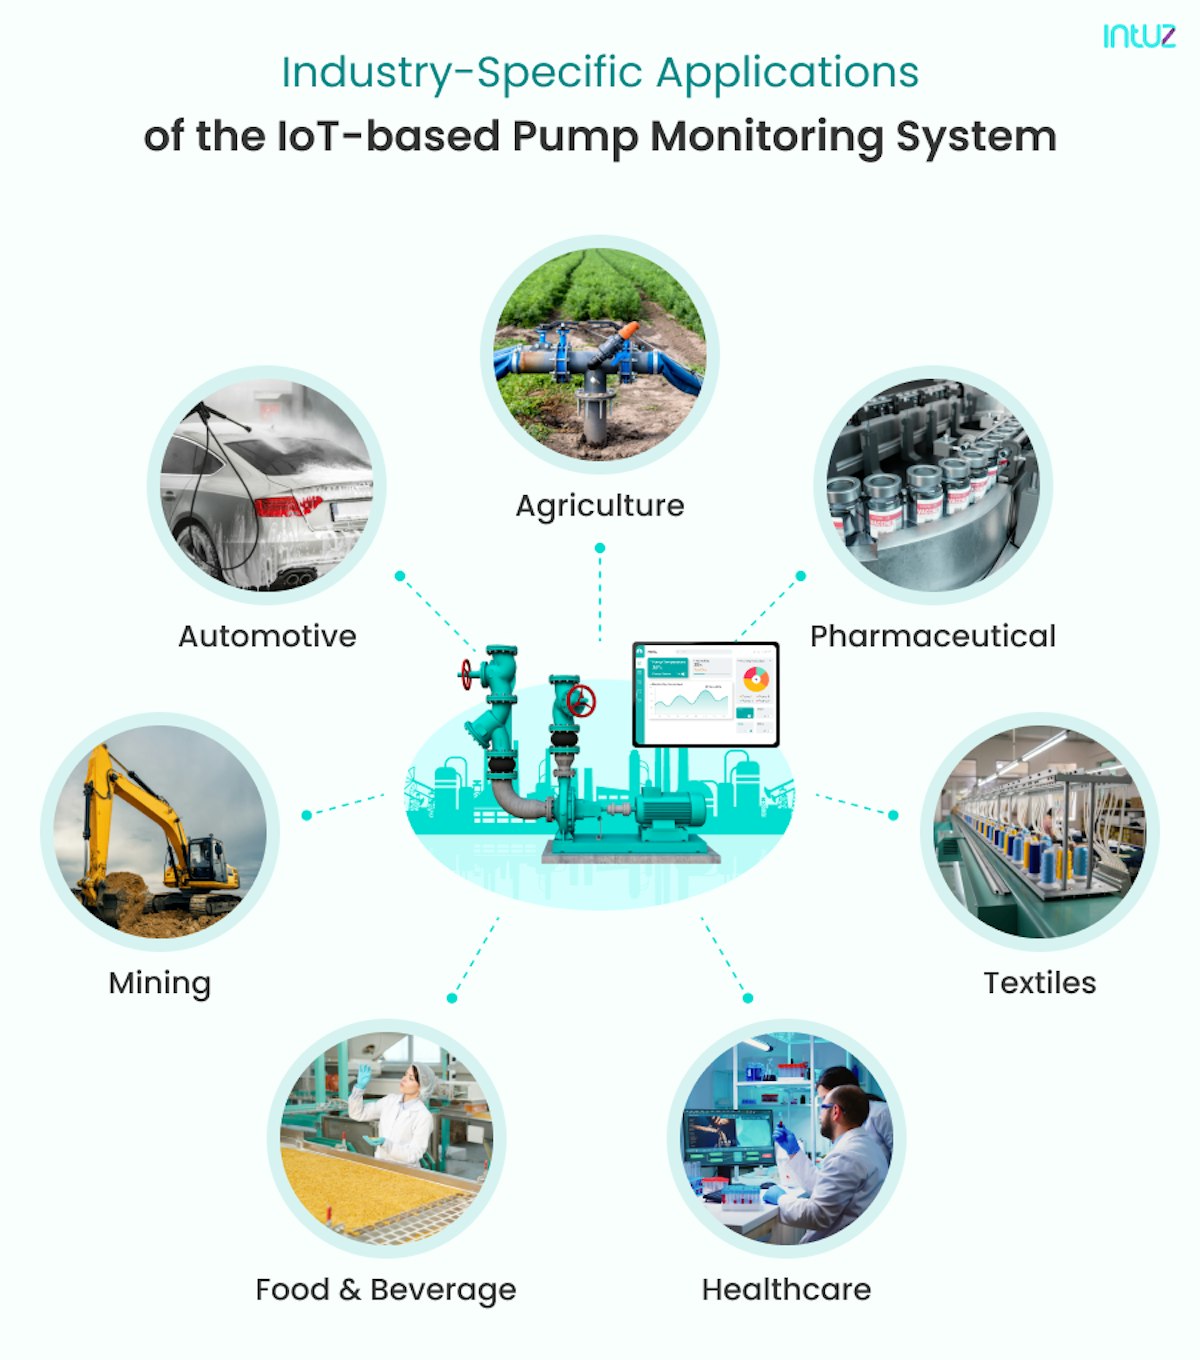 Industry-specific applications of the IoT-based pump monitoring system